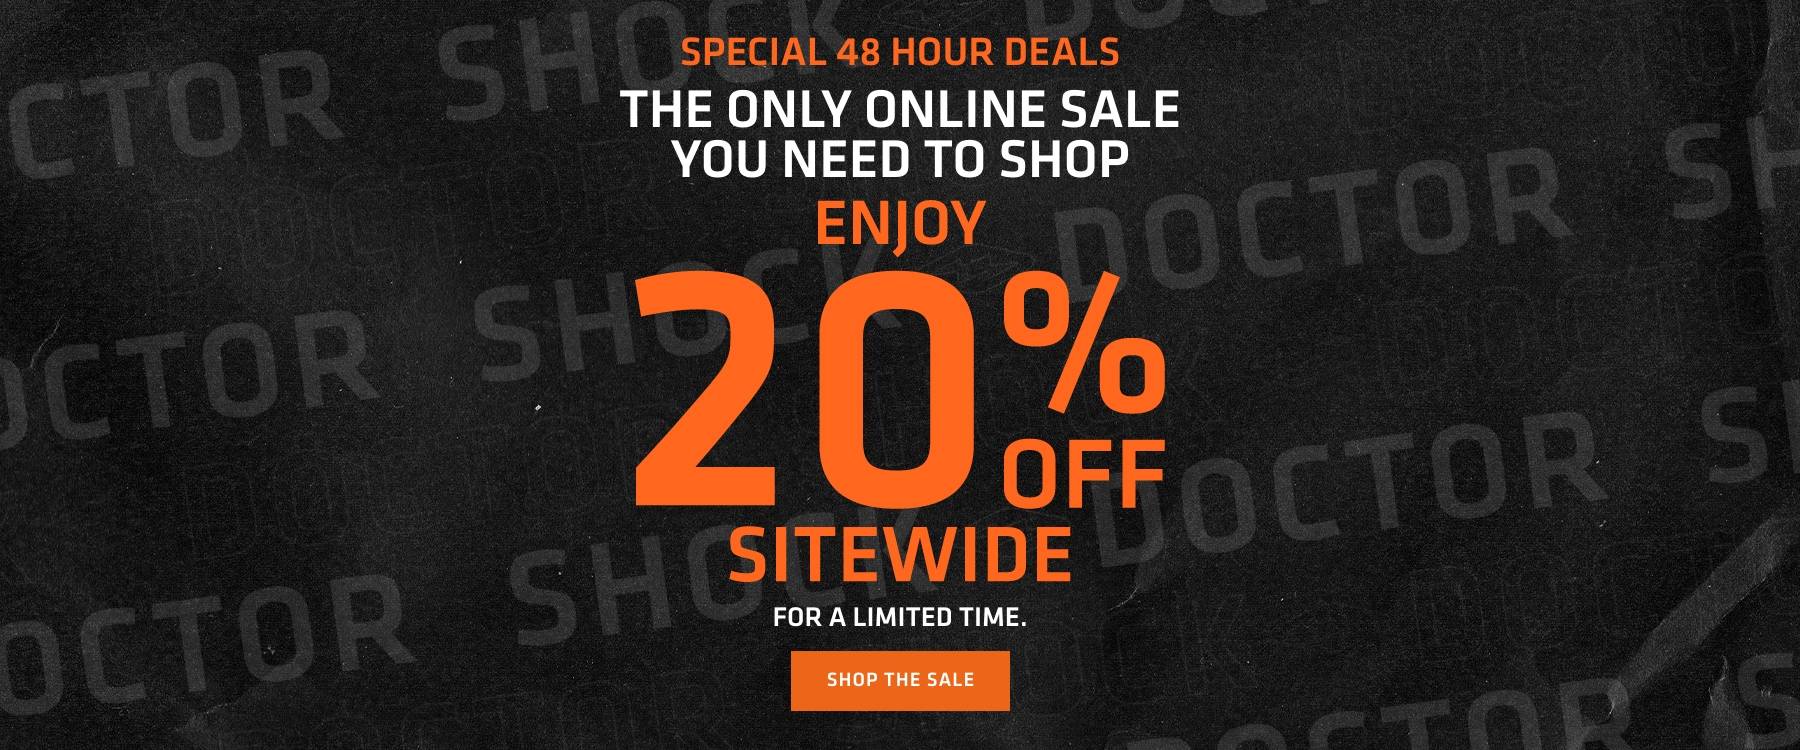 Special 48 Hour Deals - The Only Online Sale You Need To Shop - Enjoy 20% OFF SITEWIDE - For a Limited Time - Shop Now